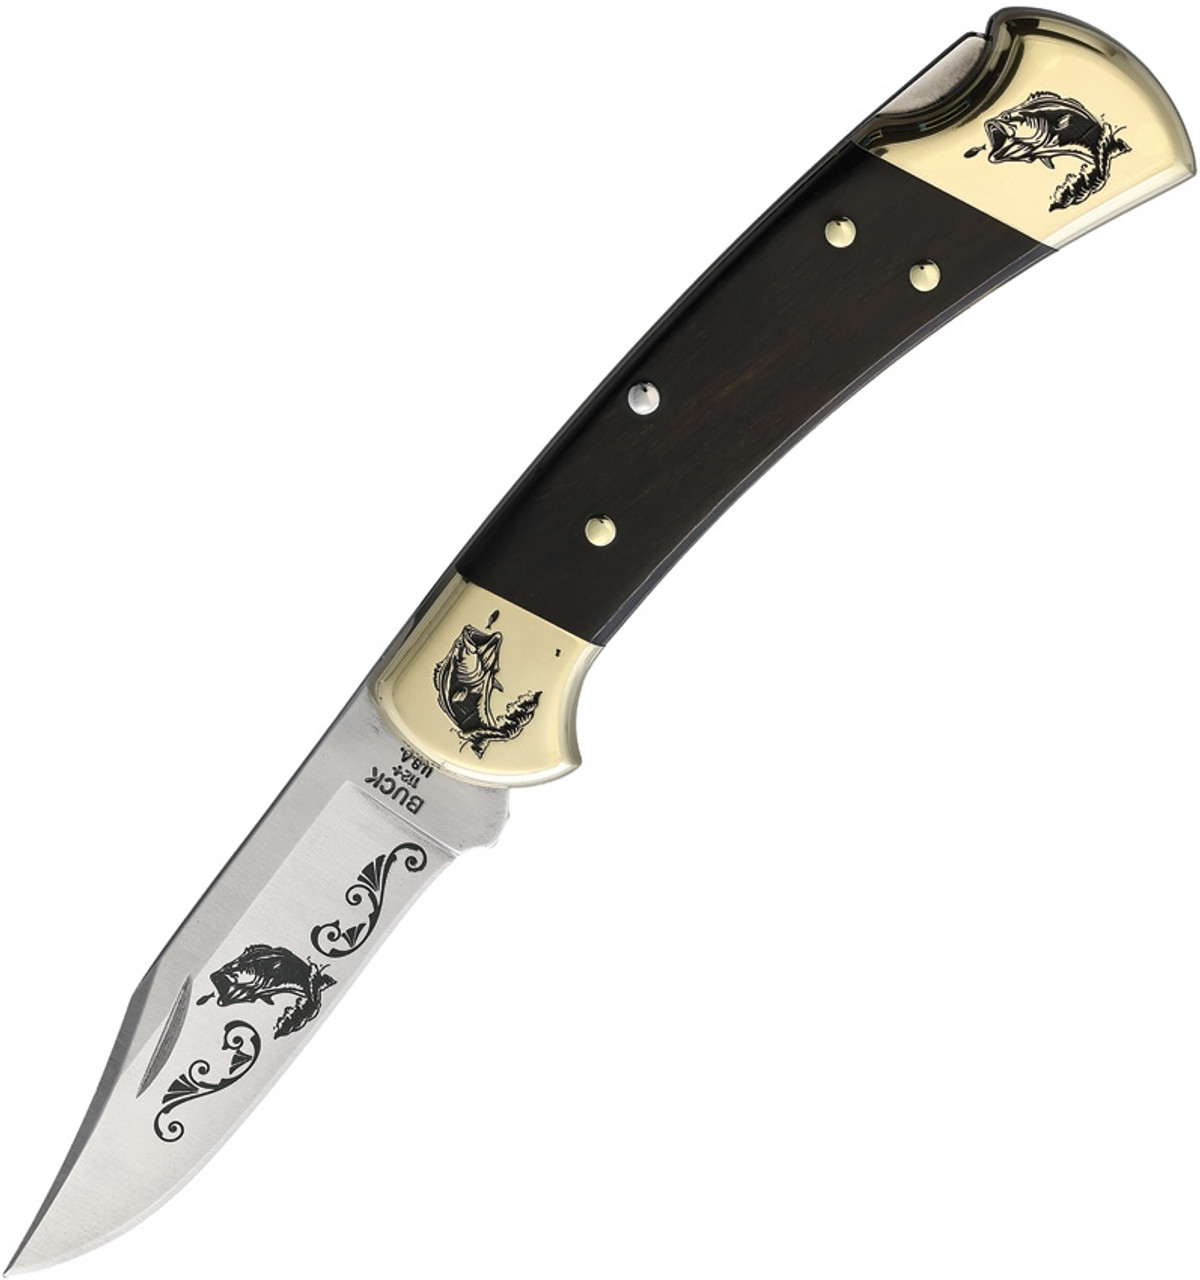 Brian Yellowhorse Custom Buck 112 Bass (YH367) 3.00" Satin 420HC Stainless Steel Clip Point Blade w/ Bass Etching, Ebony Wood Handle w/ Etched Brass Bolsters